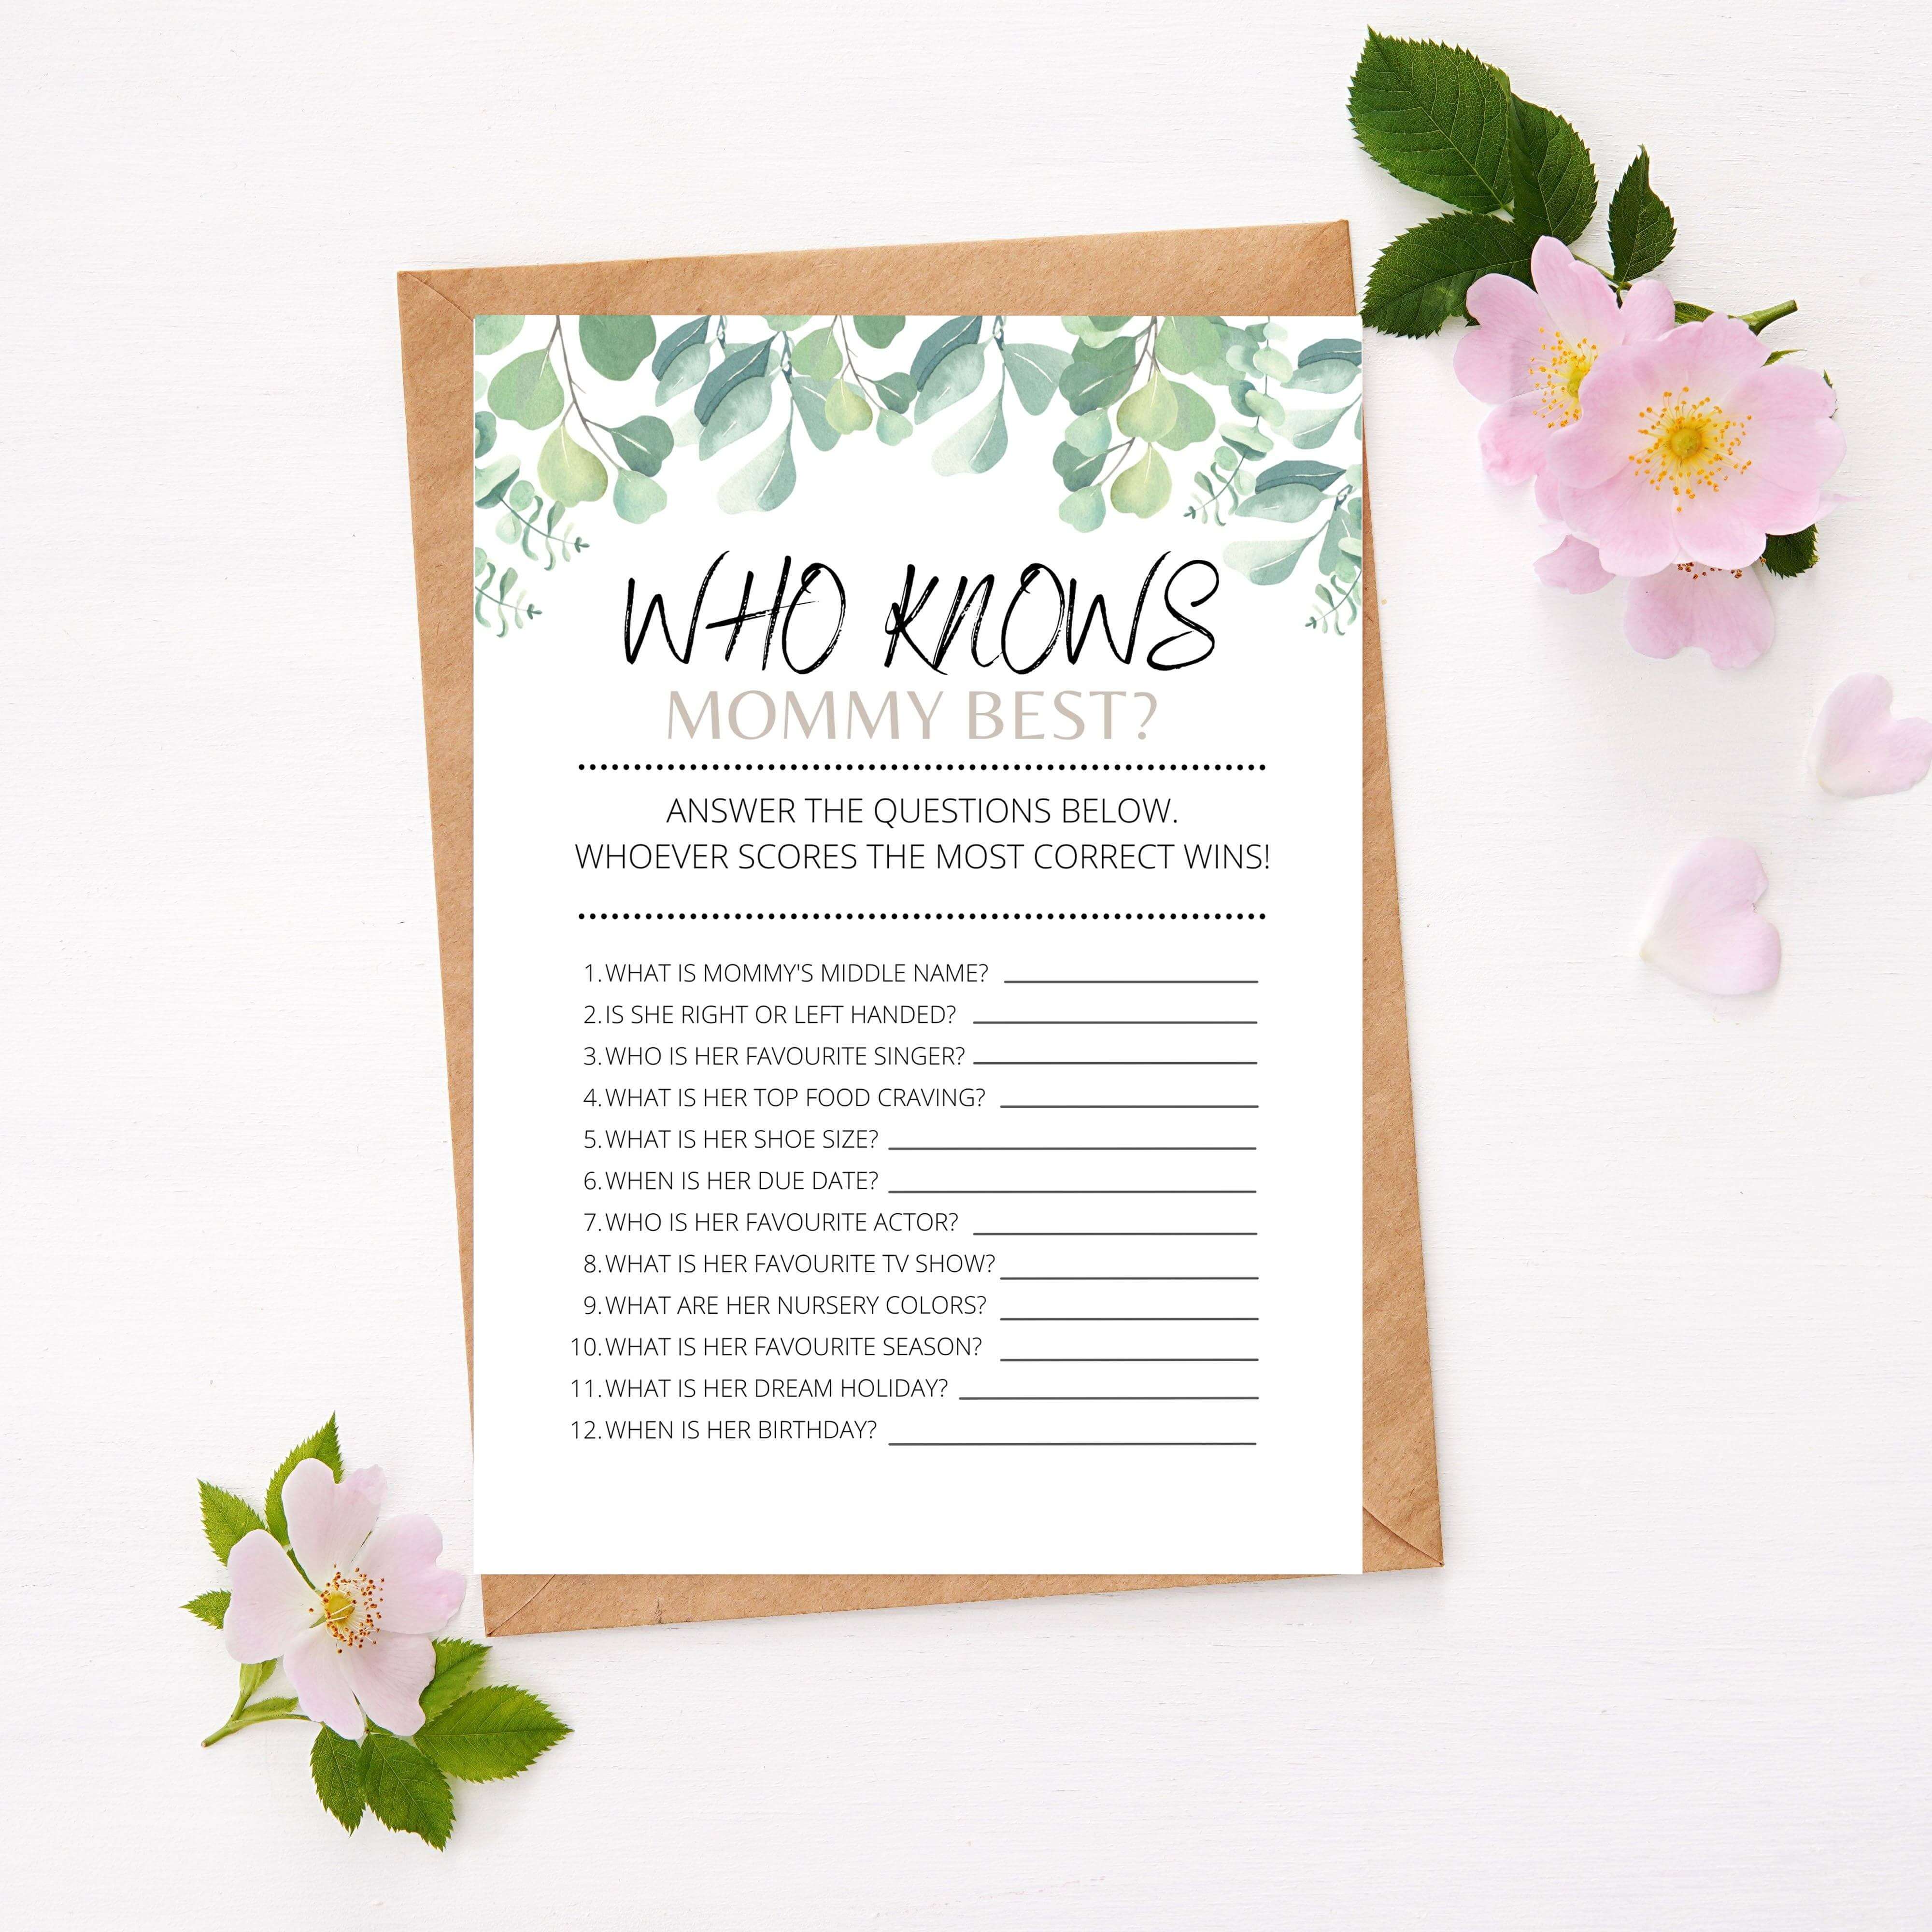 Boobs or Butts Baby Shower Game - Botanical Printable Baby Shower